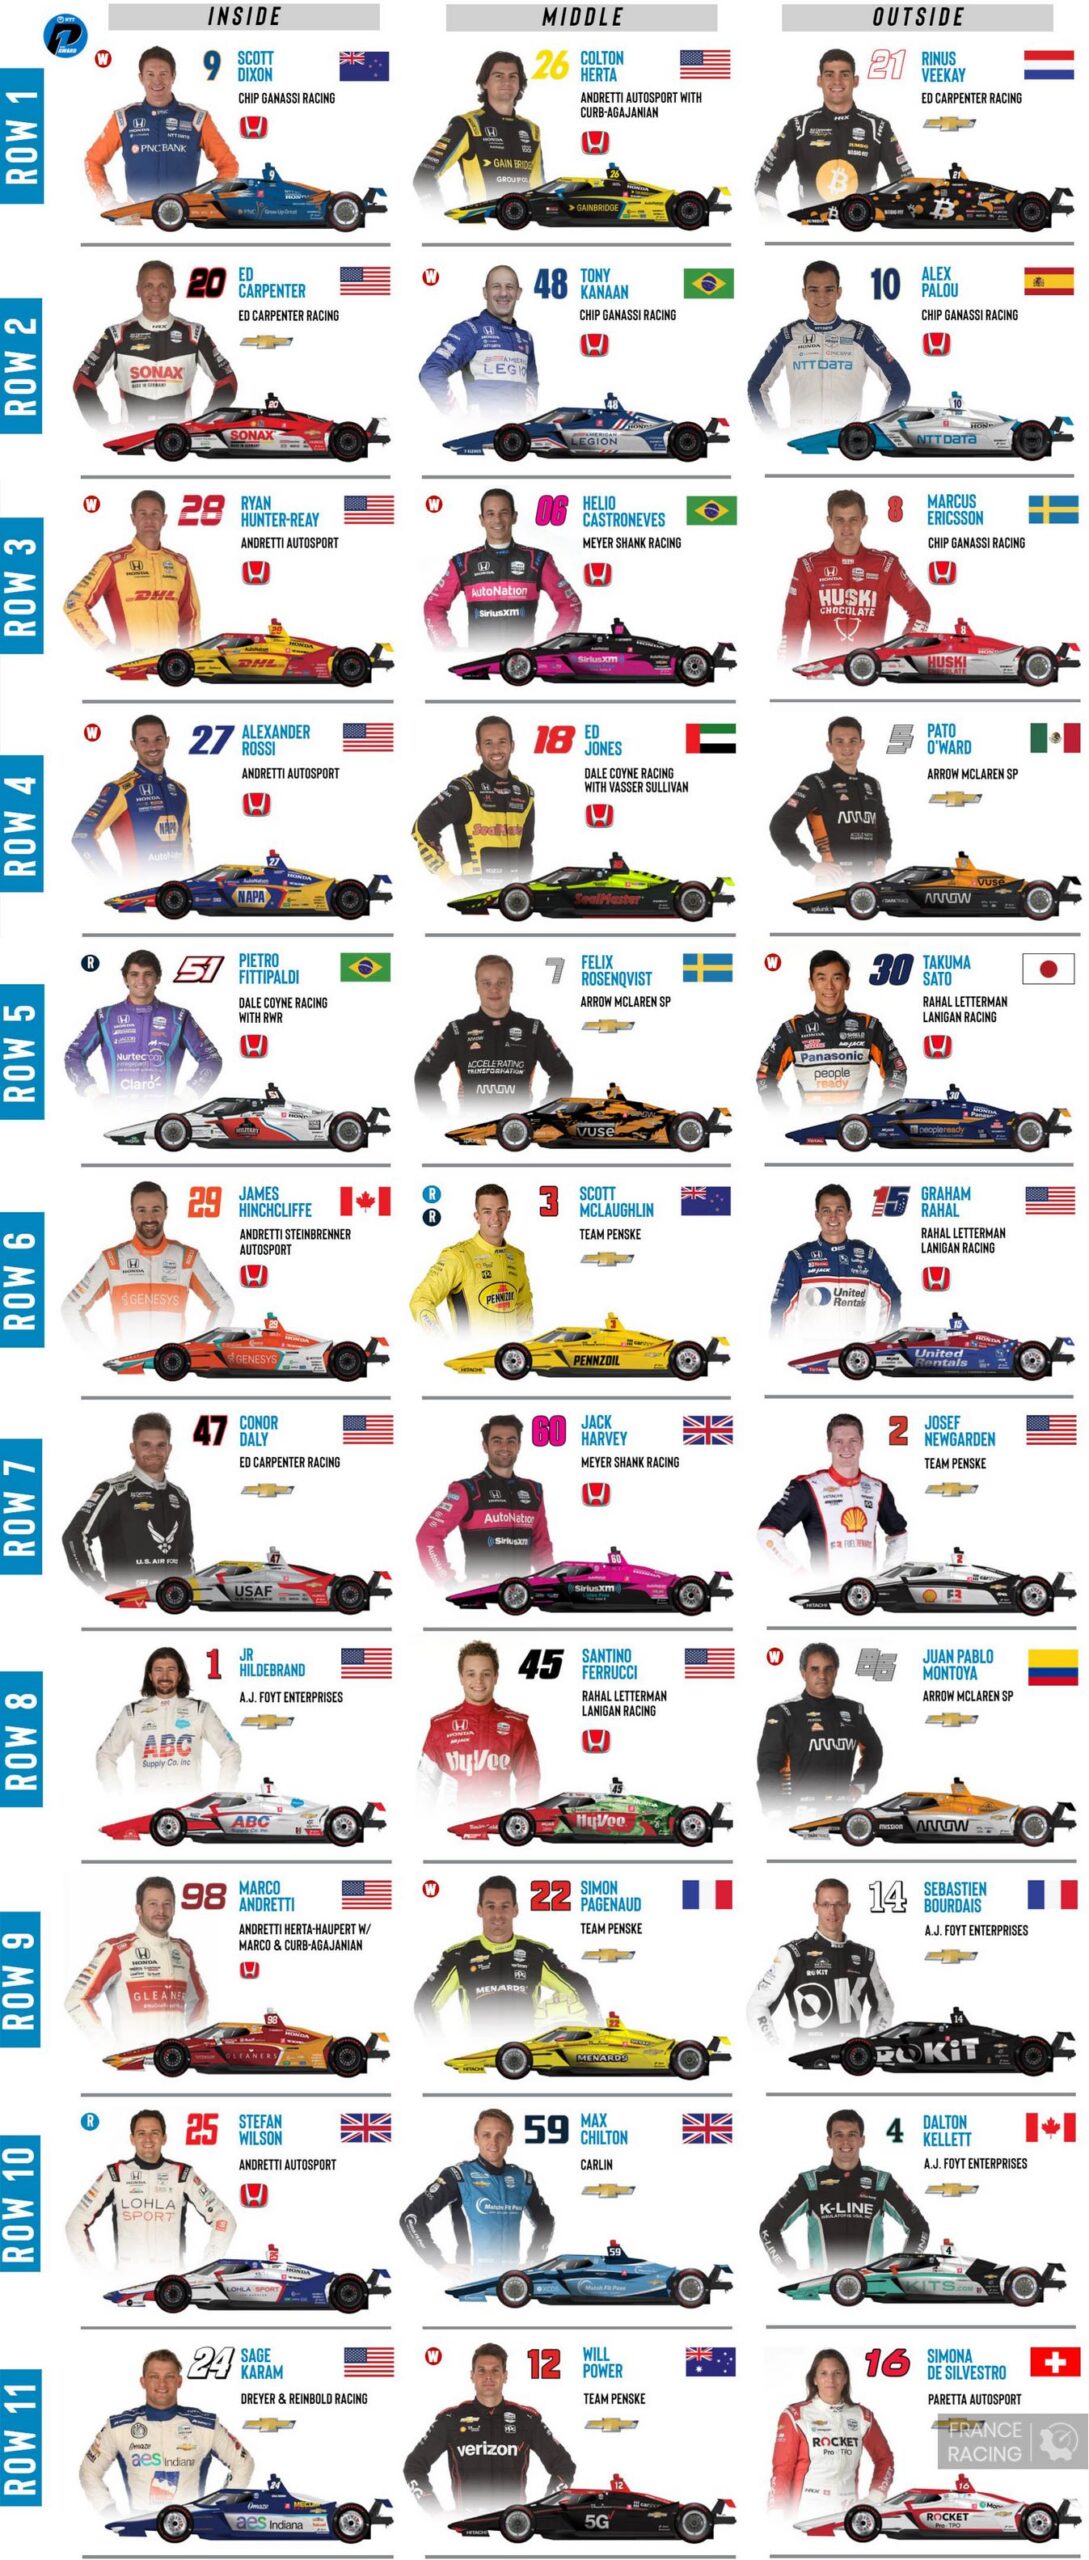 the starting grid for the 105th edition! - US Sports